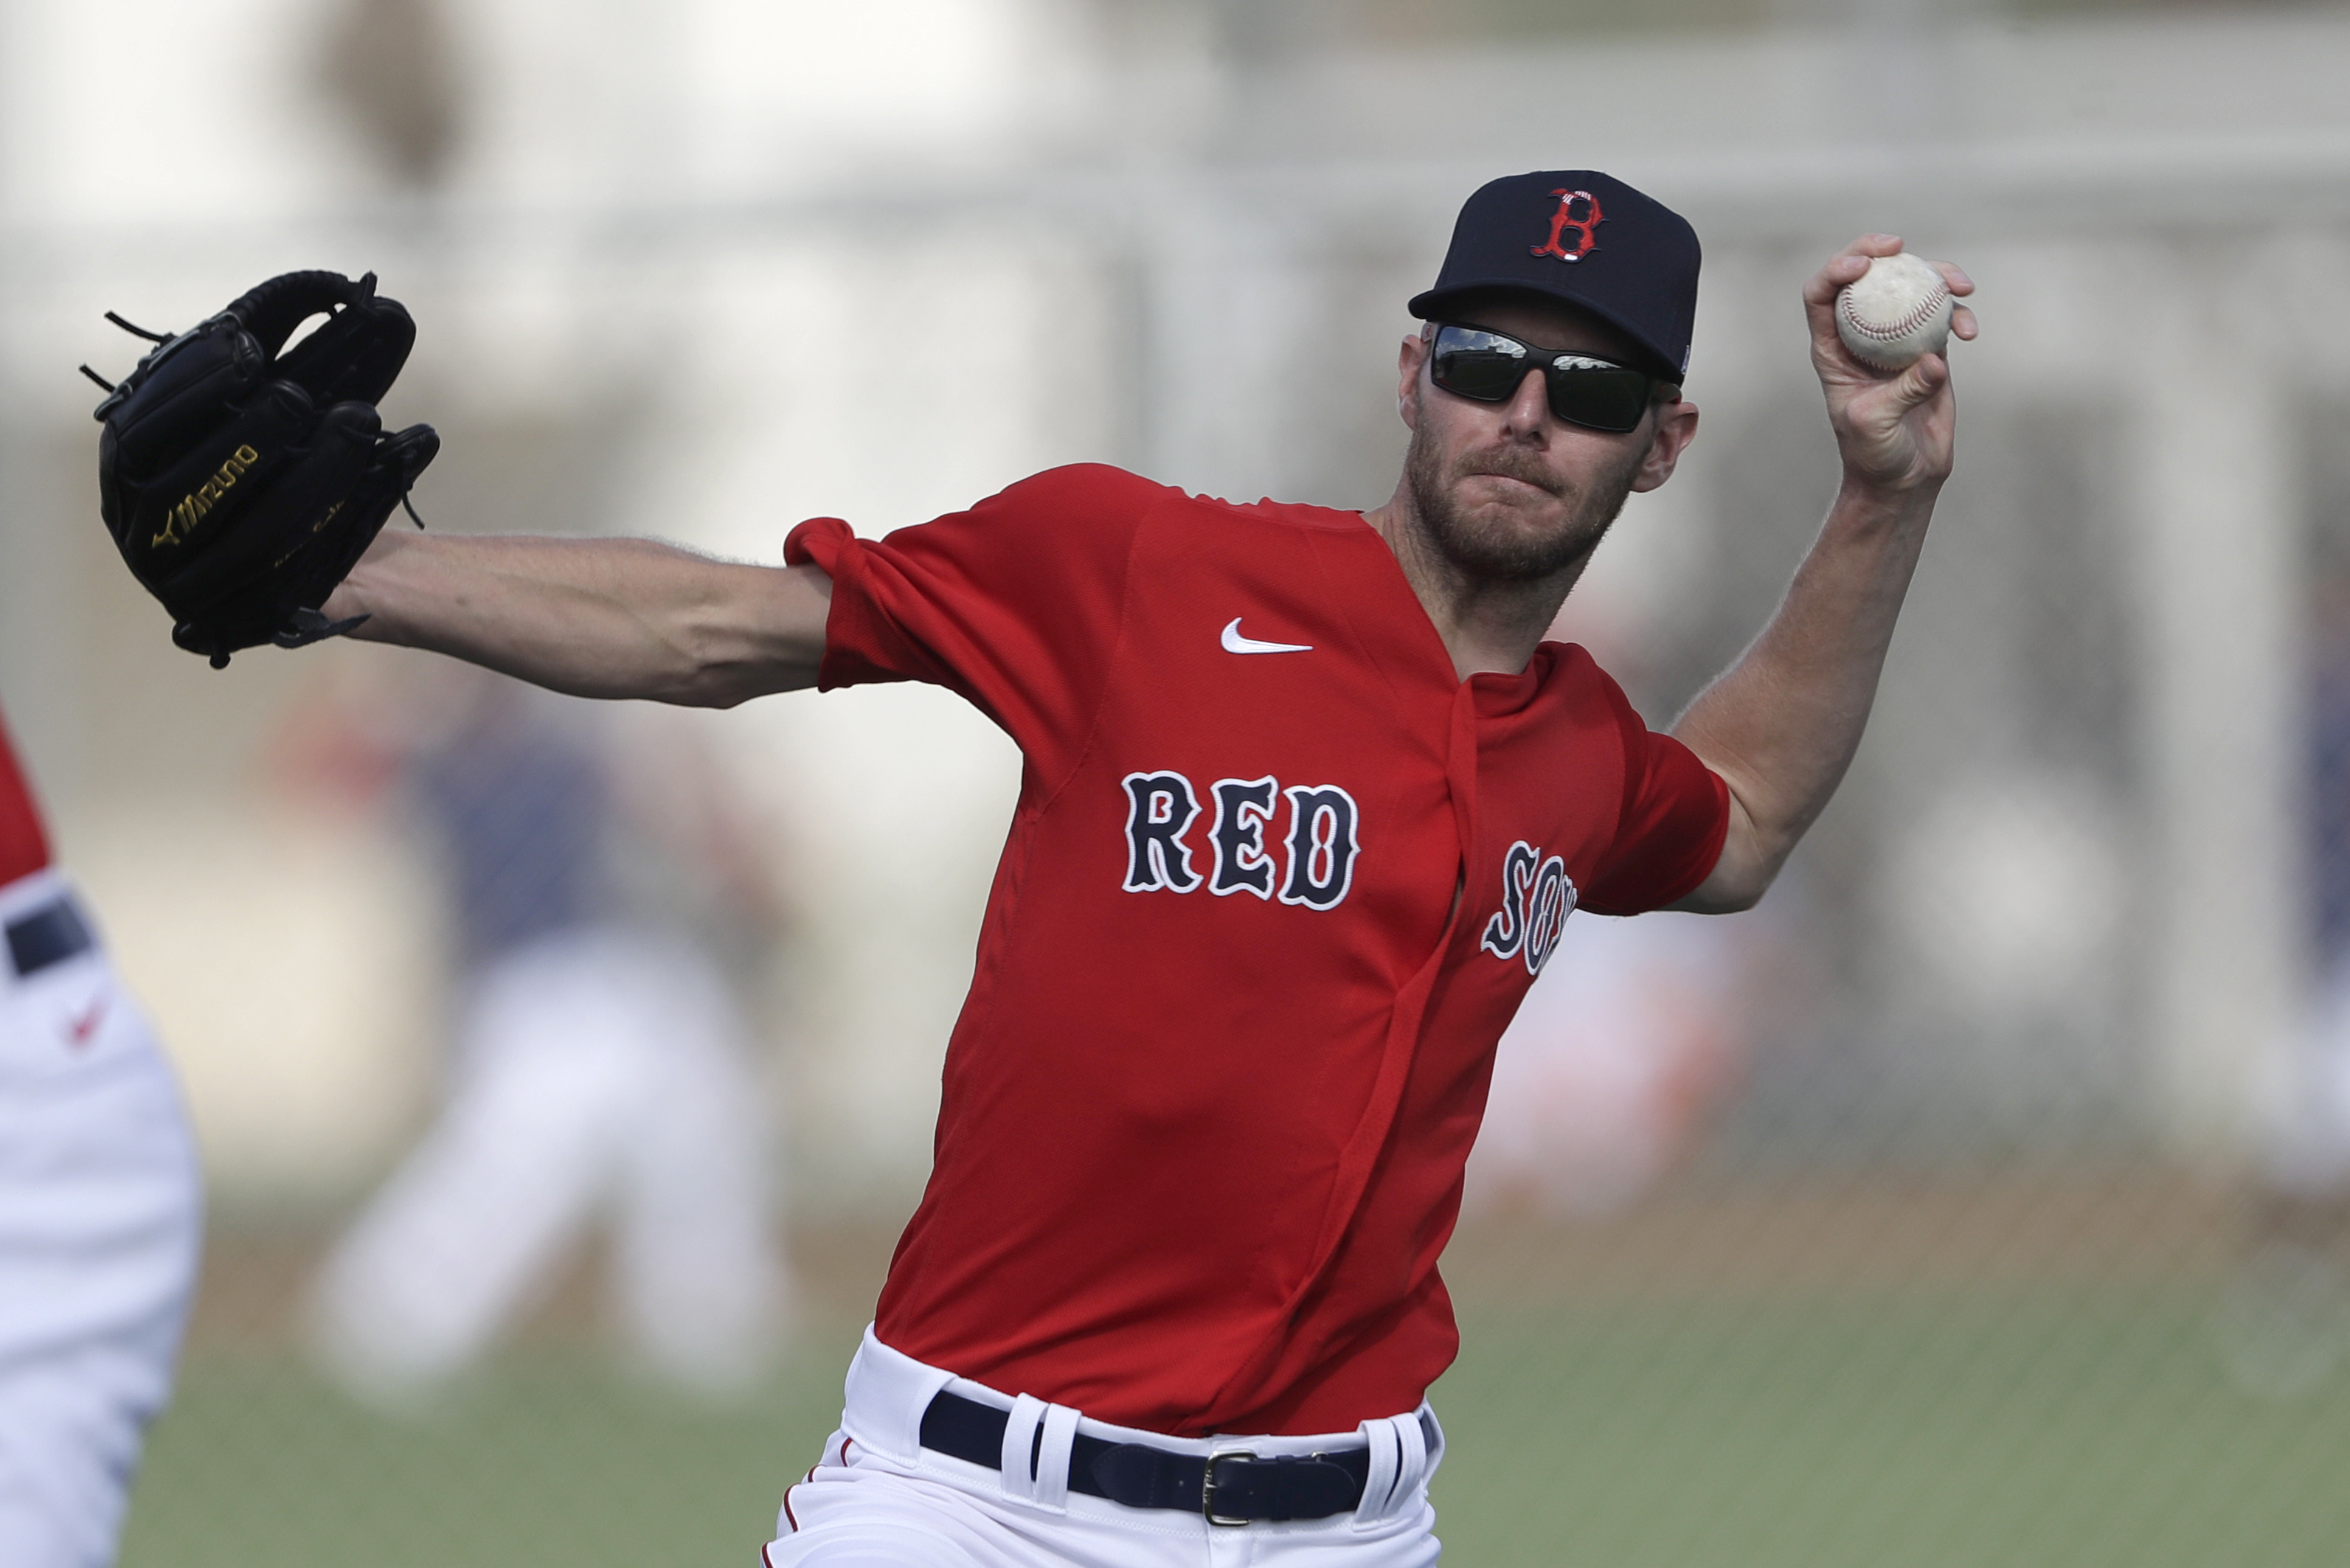 Chris Sale on If Return Can Make Red Sox World Series Contenders: 'That's the Plan'